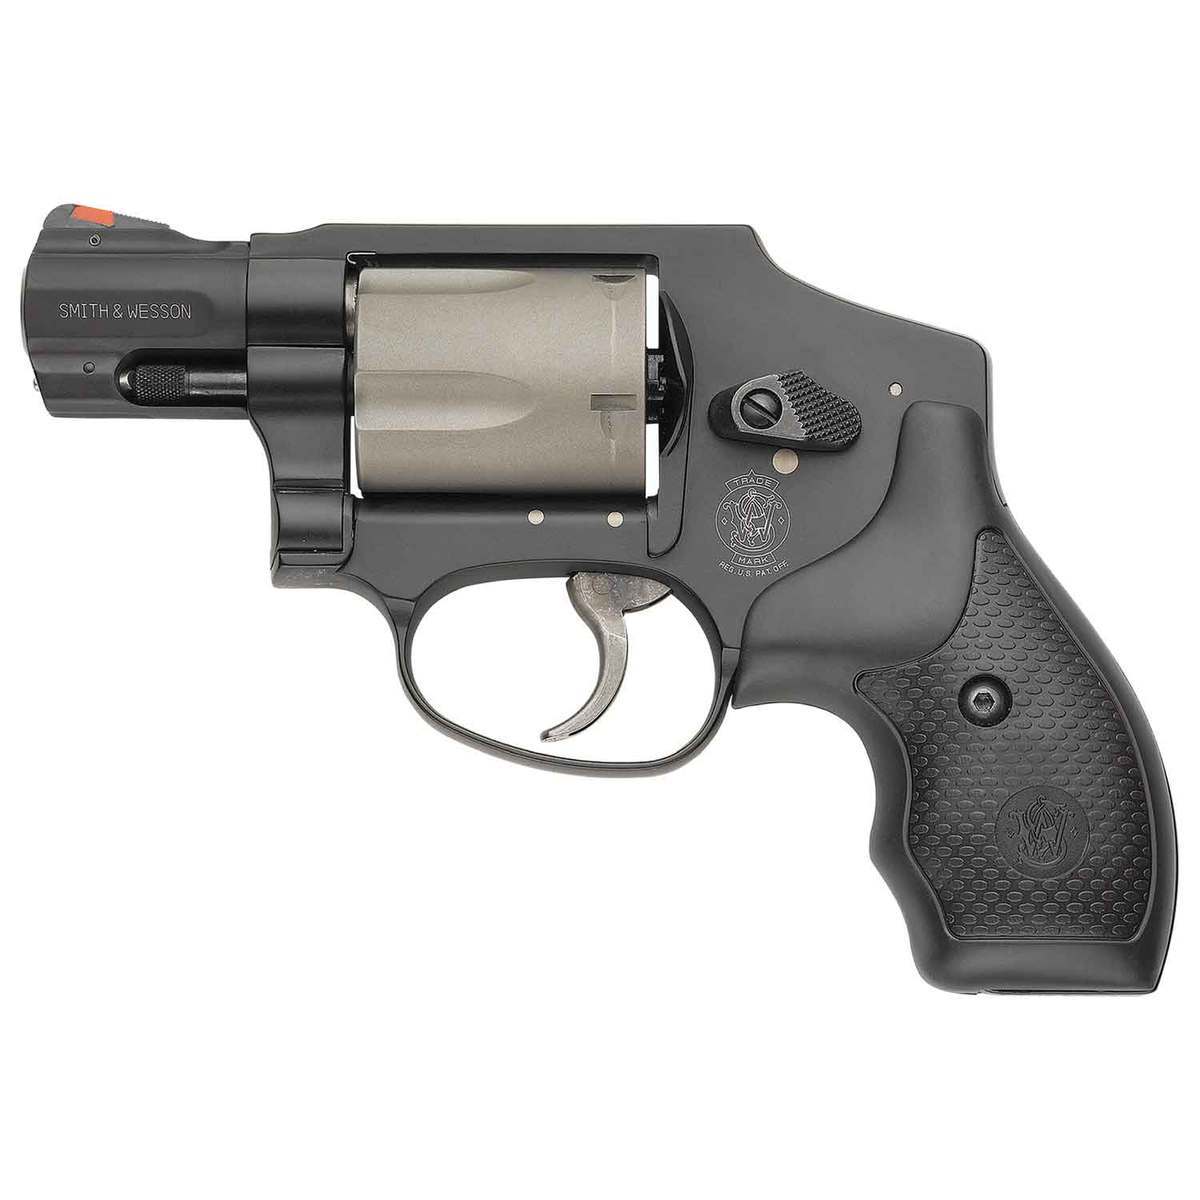 Purchasing a New Sidearm? Don't Buy a Gun until you’ve Read This Guide!